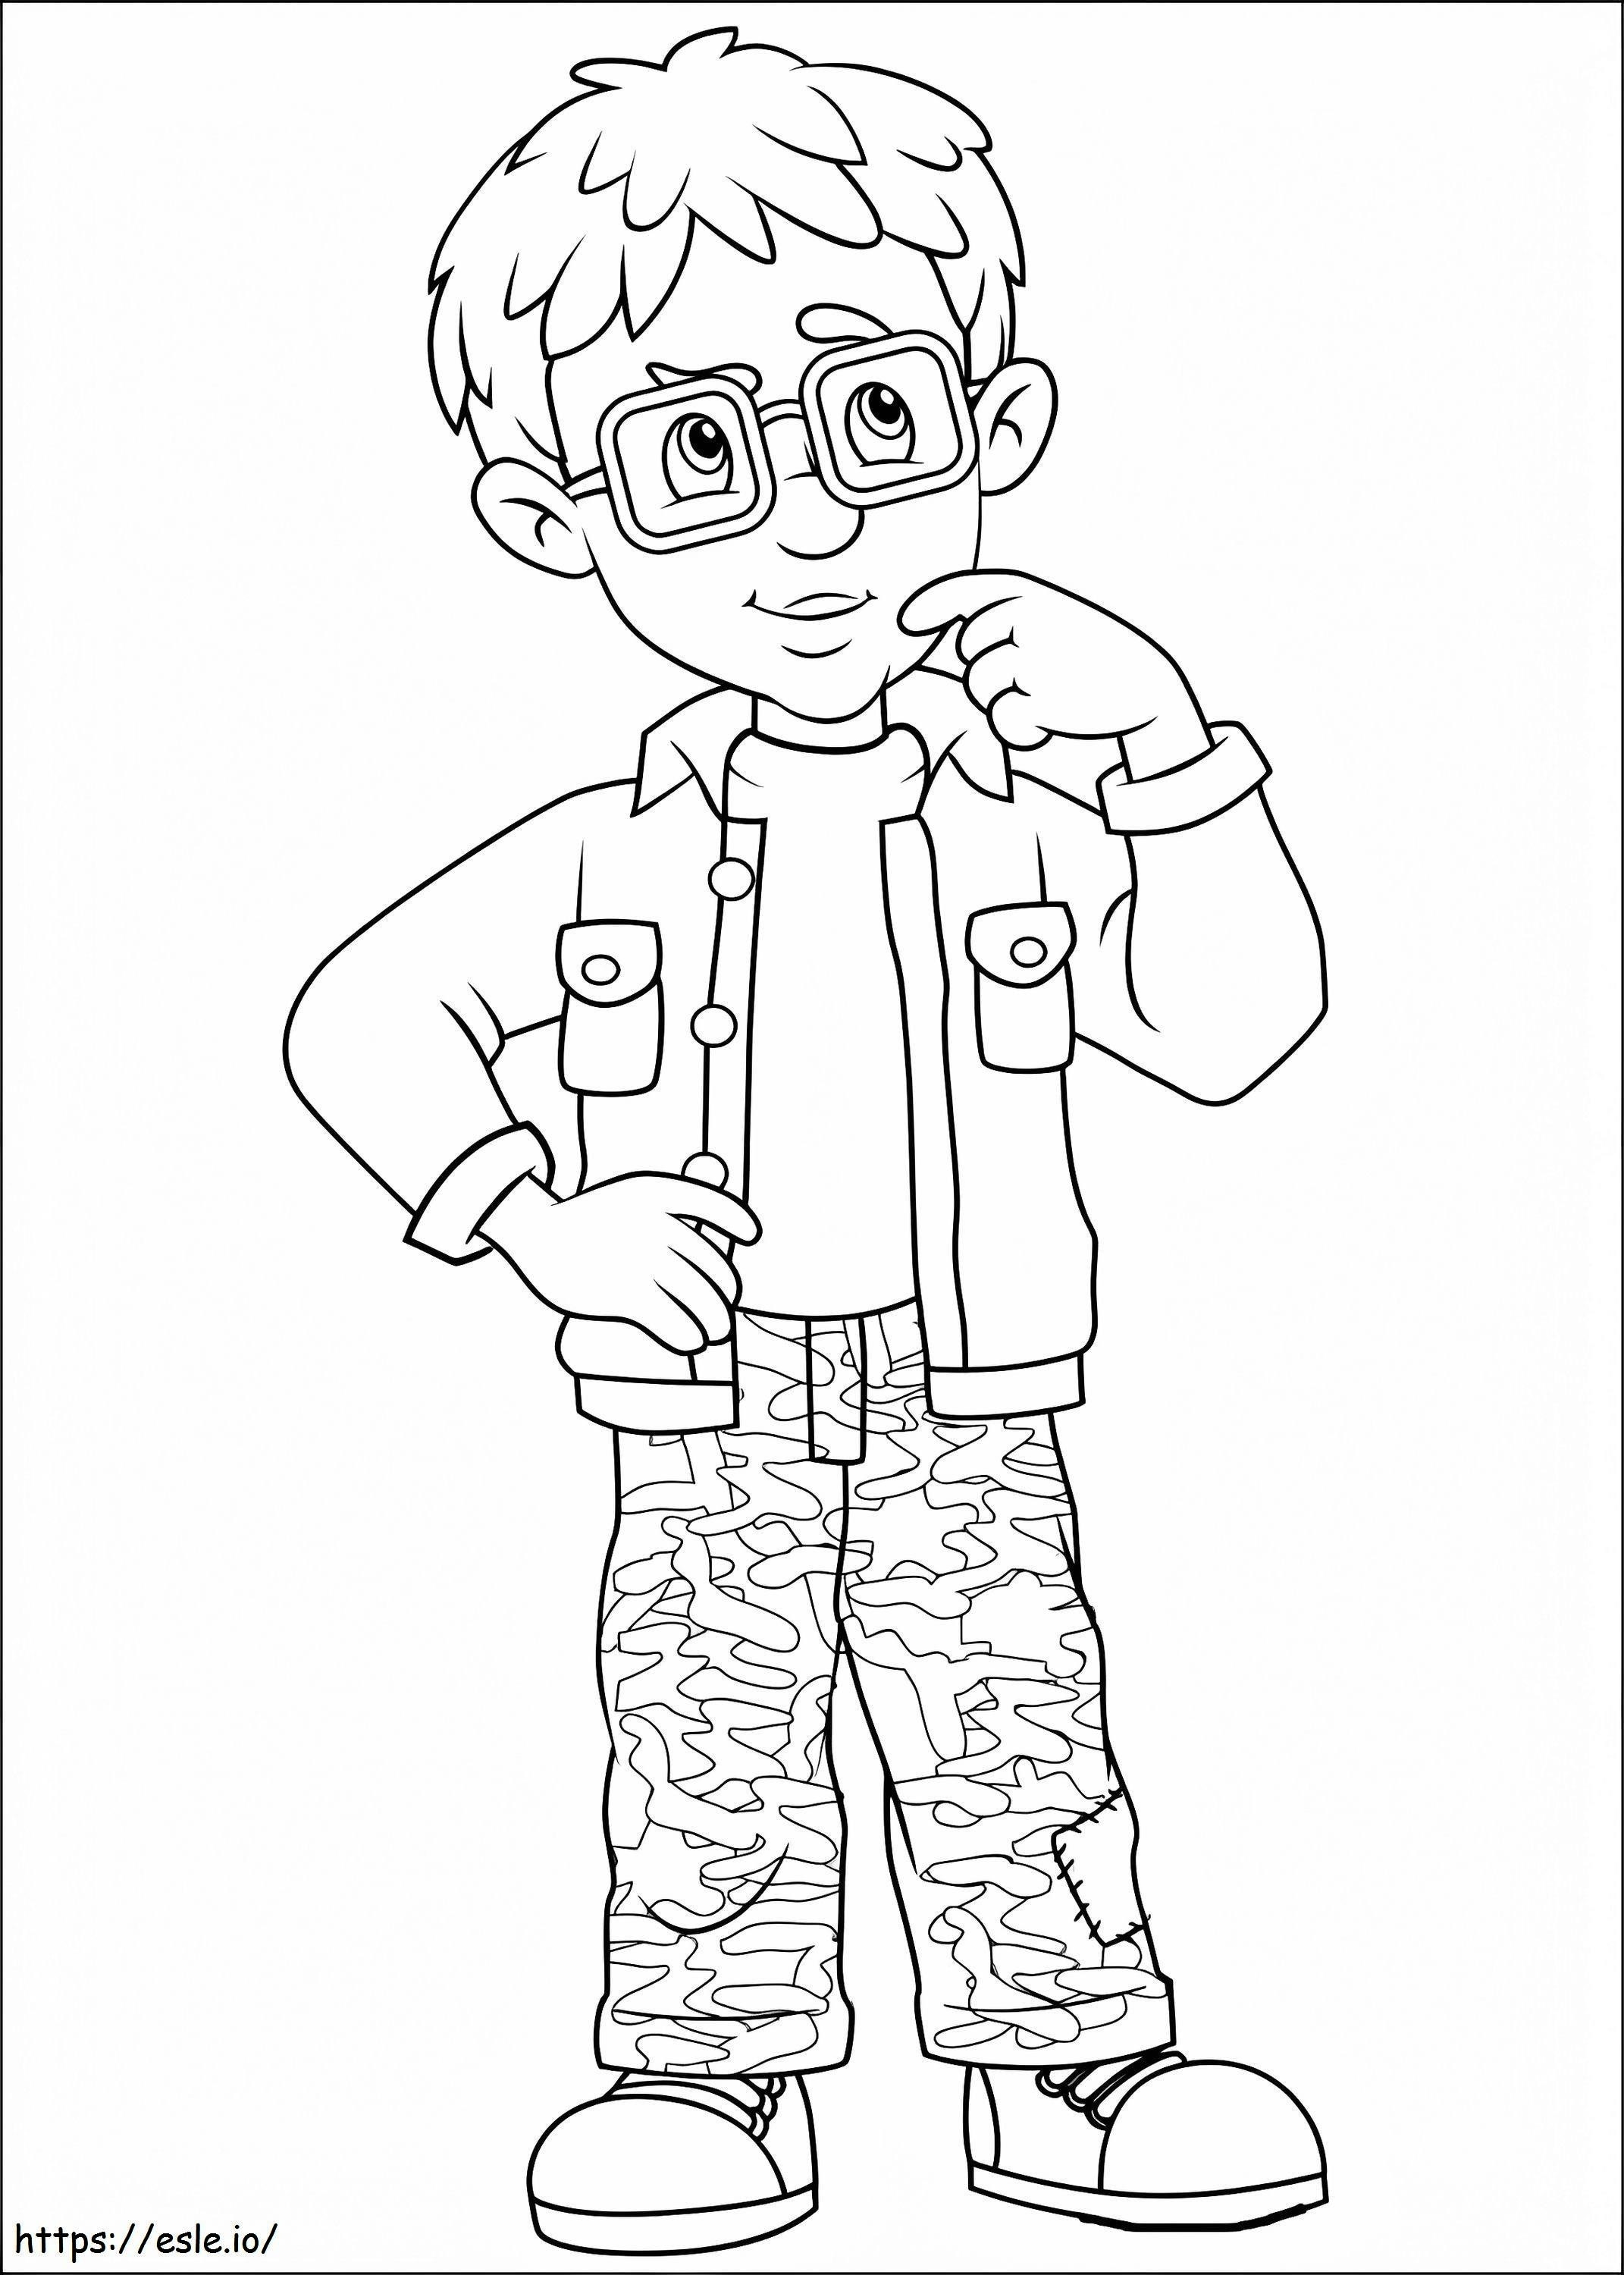 Norman Price 1 coloring page